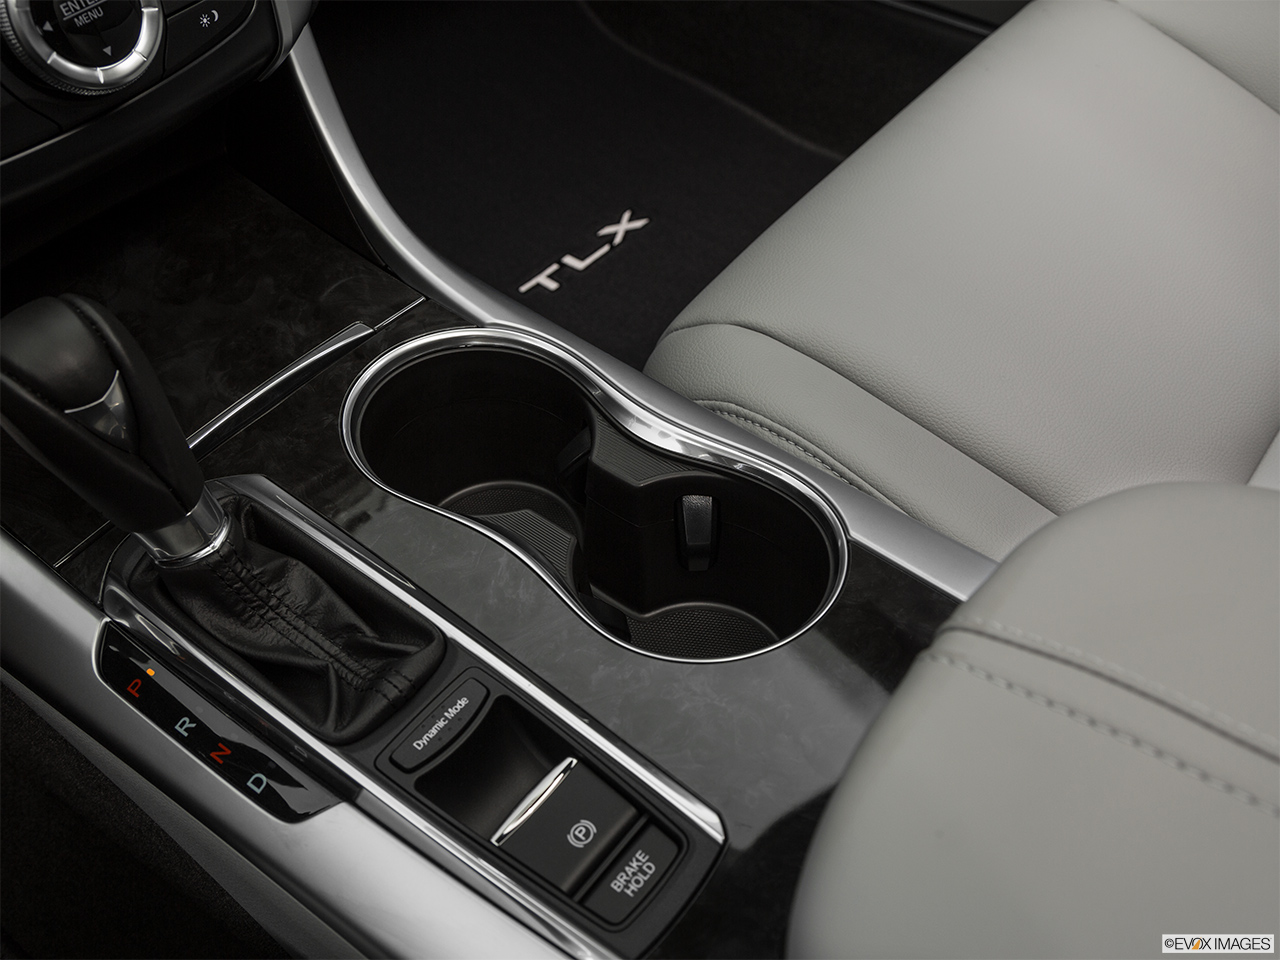 2019 Acura TLX 2.4 8-DCT P-AWS Cup holders. 